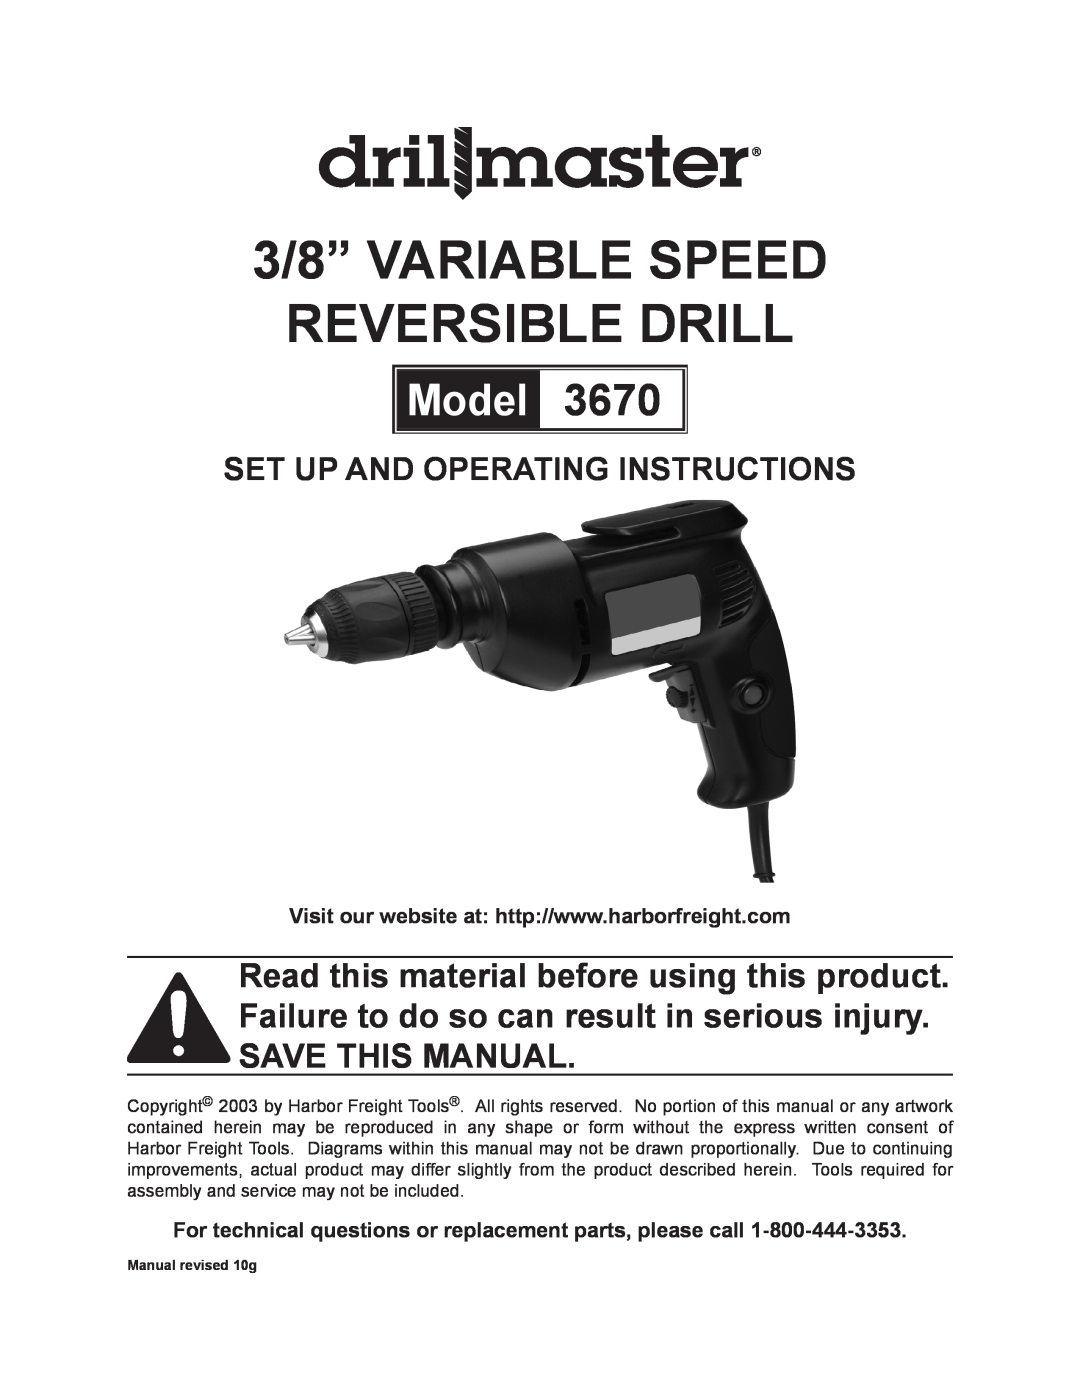 Harbor Freight Tools 3670 operating instructions 3/8” VARIABLE SPEED REVERSIBLE DRILL, Model 